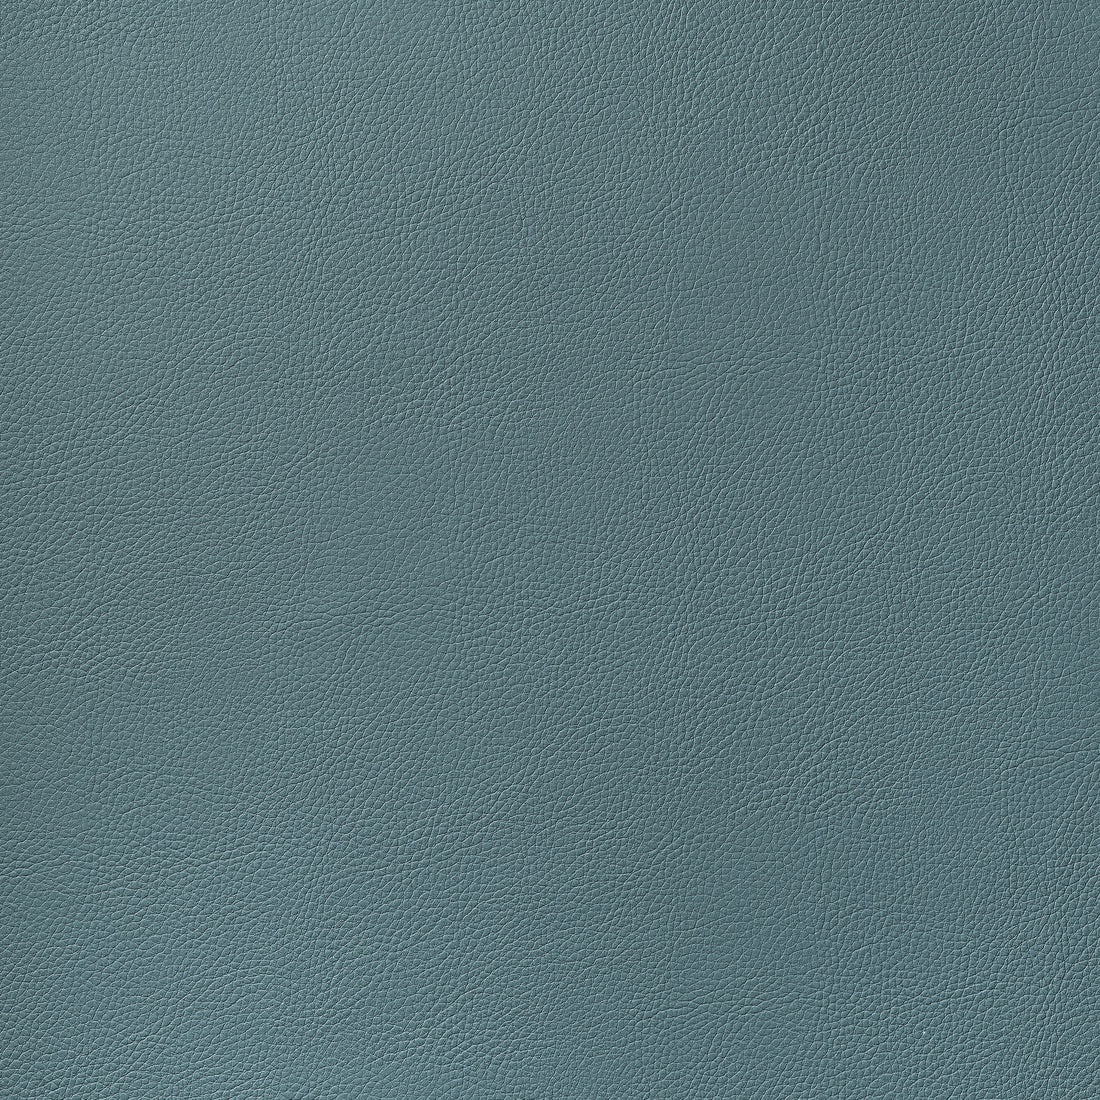 Arcata fabric in lagoon color - pattern number W78390 - by Thibaut in the  Sierra collection